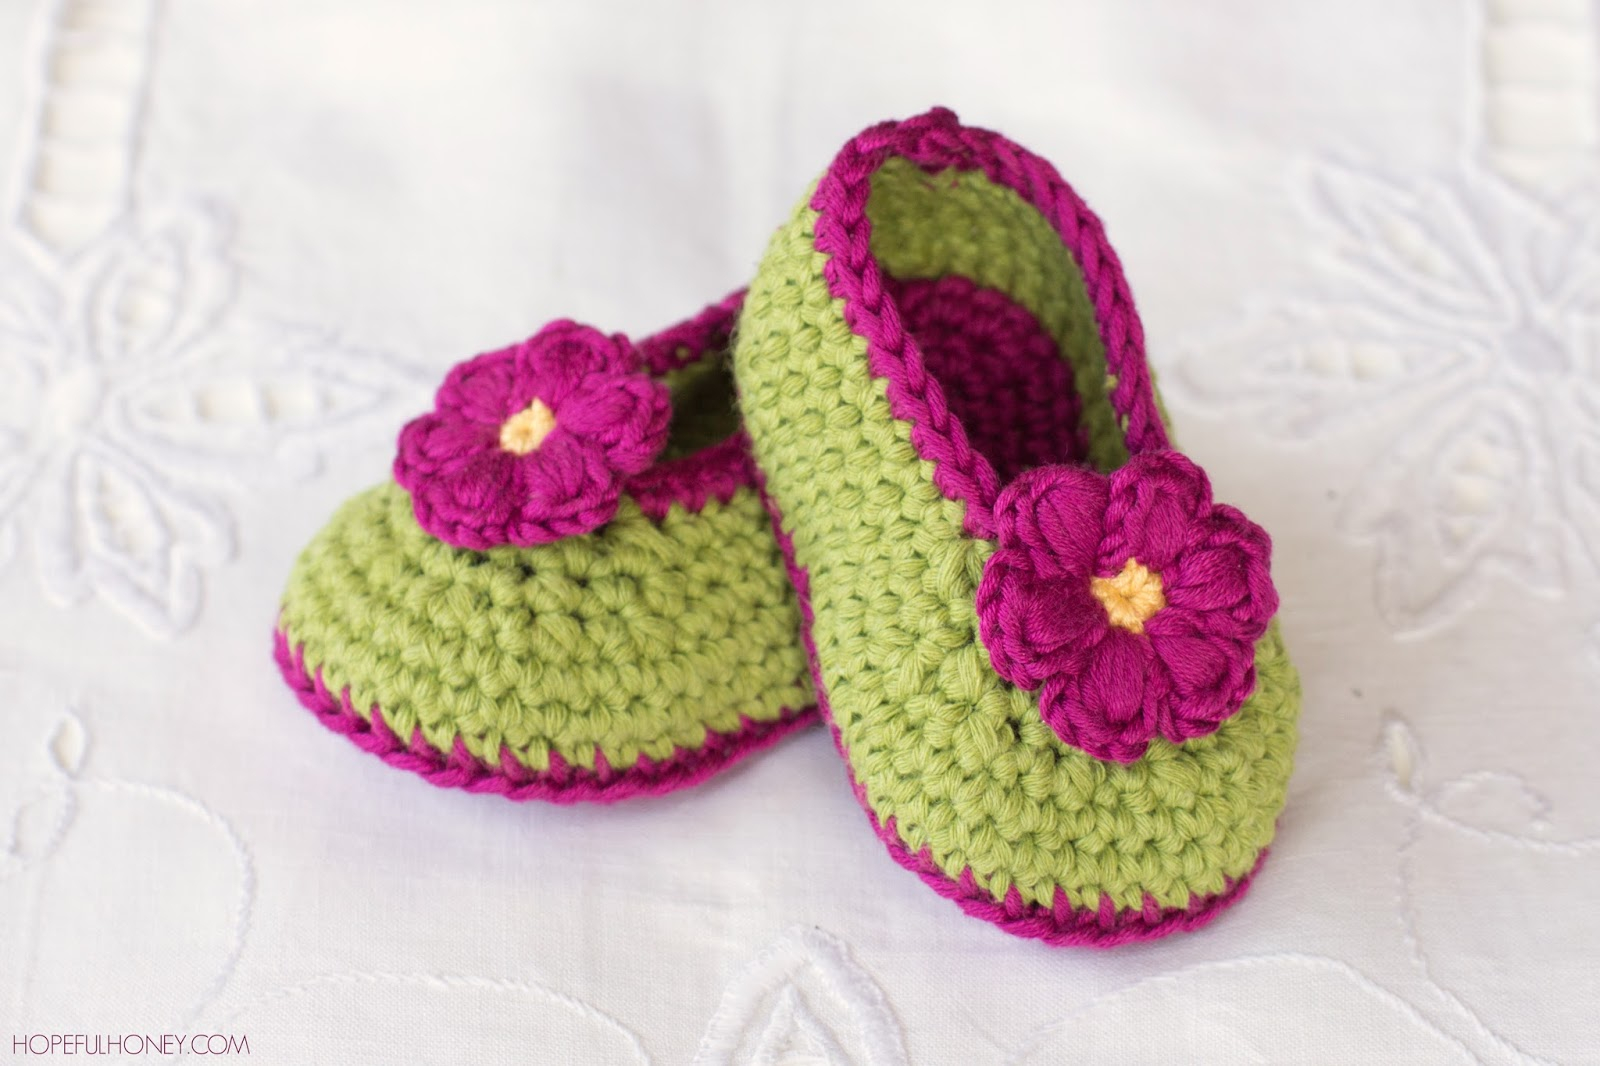 Free Crochet Baby Patterns Easy To Make Crochet Booties Crochet And Knitting Patterns 2019